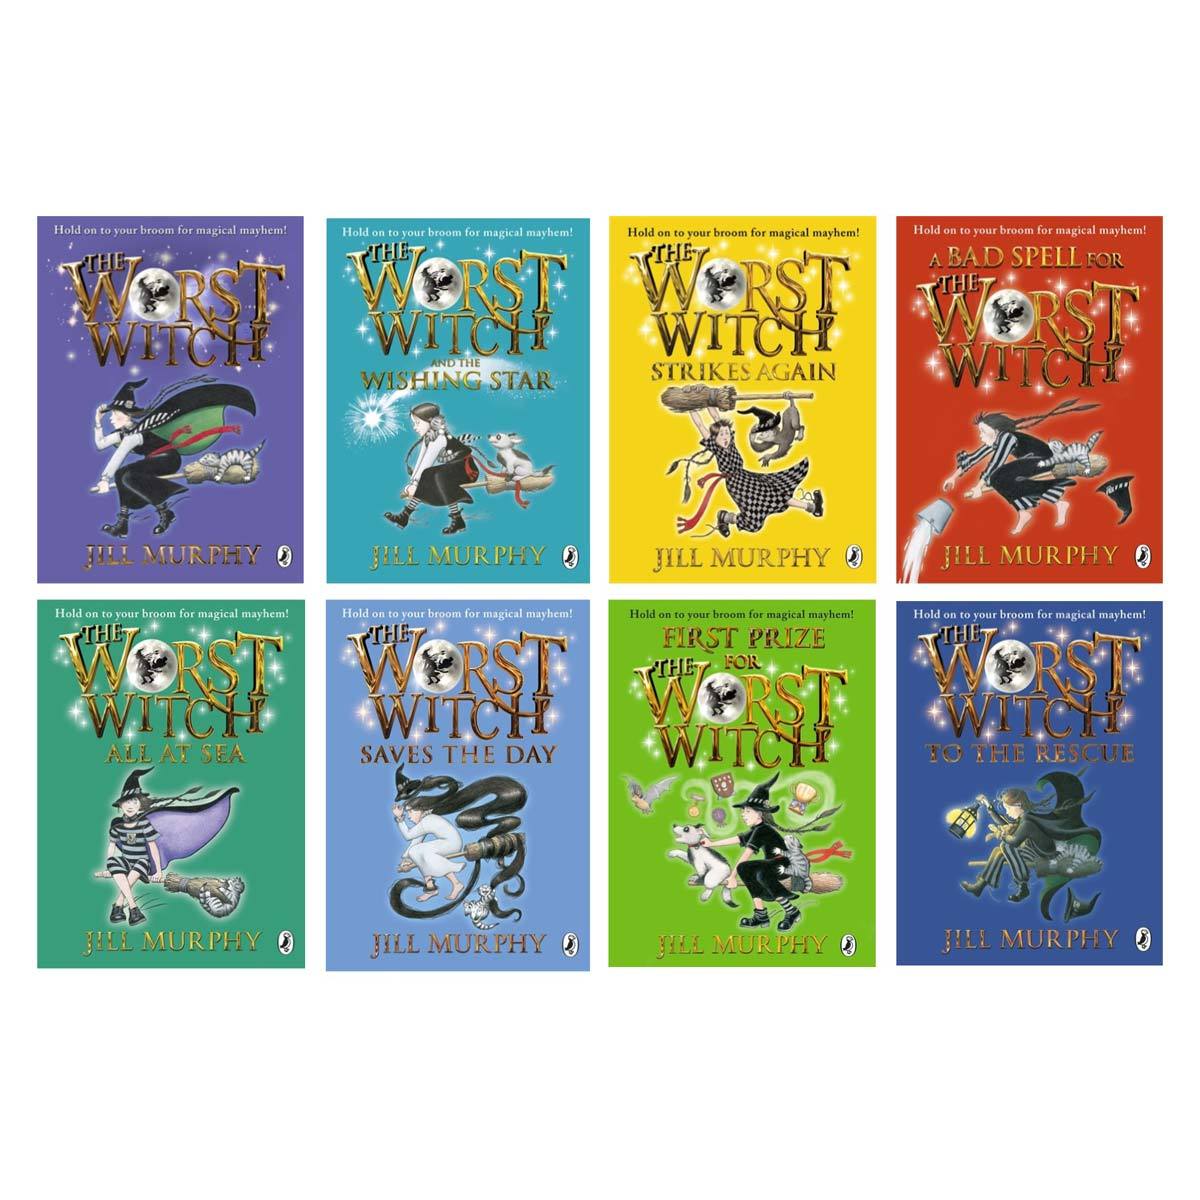 The Worst Witch 8 Piece Slipcase Collection